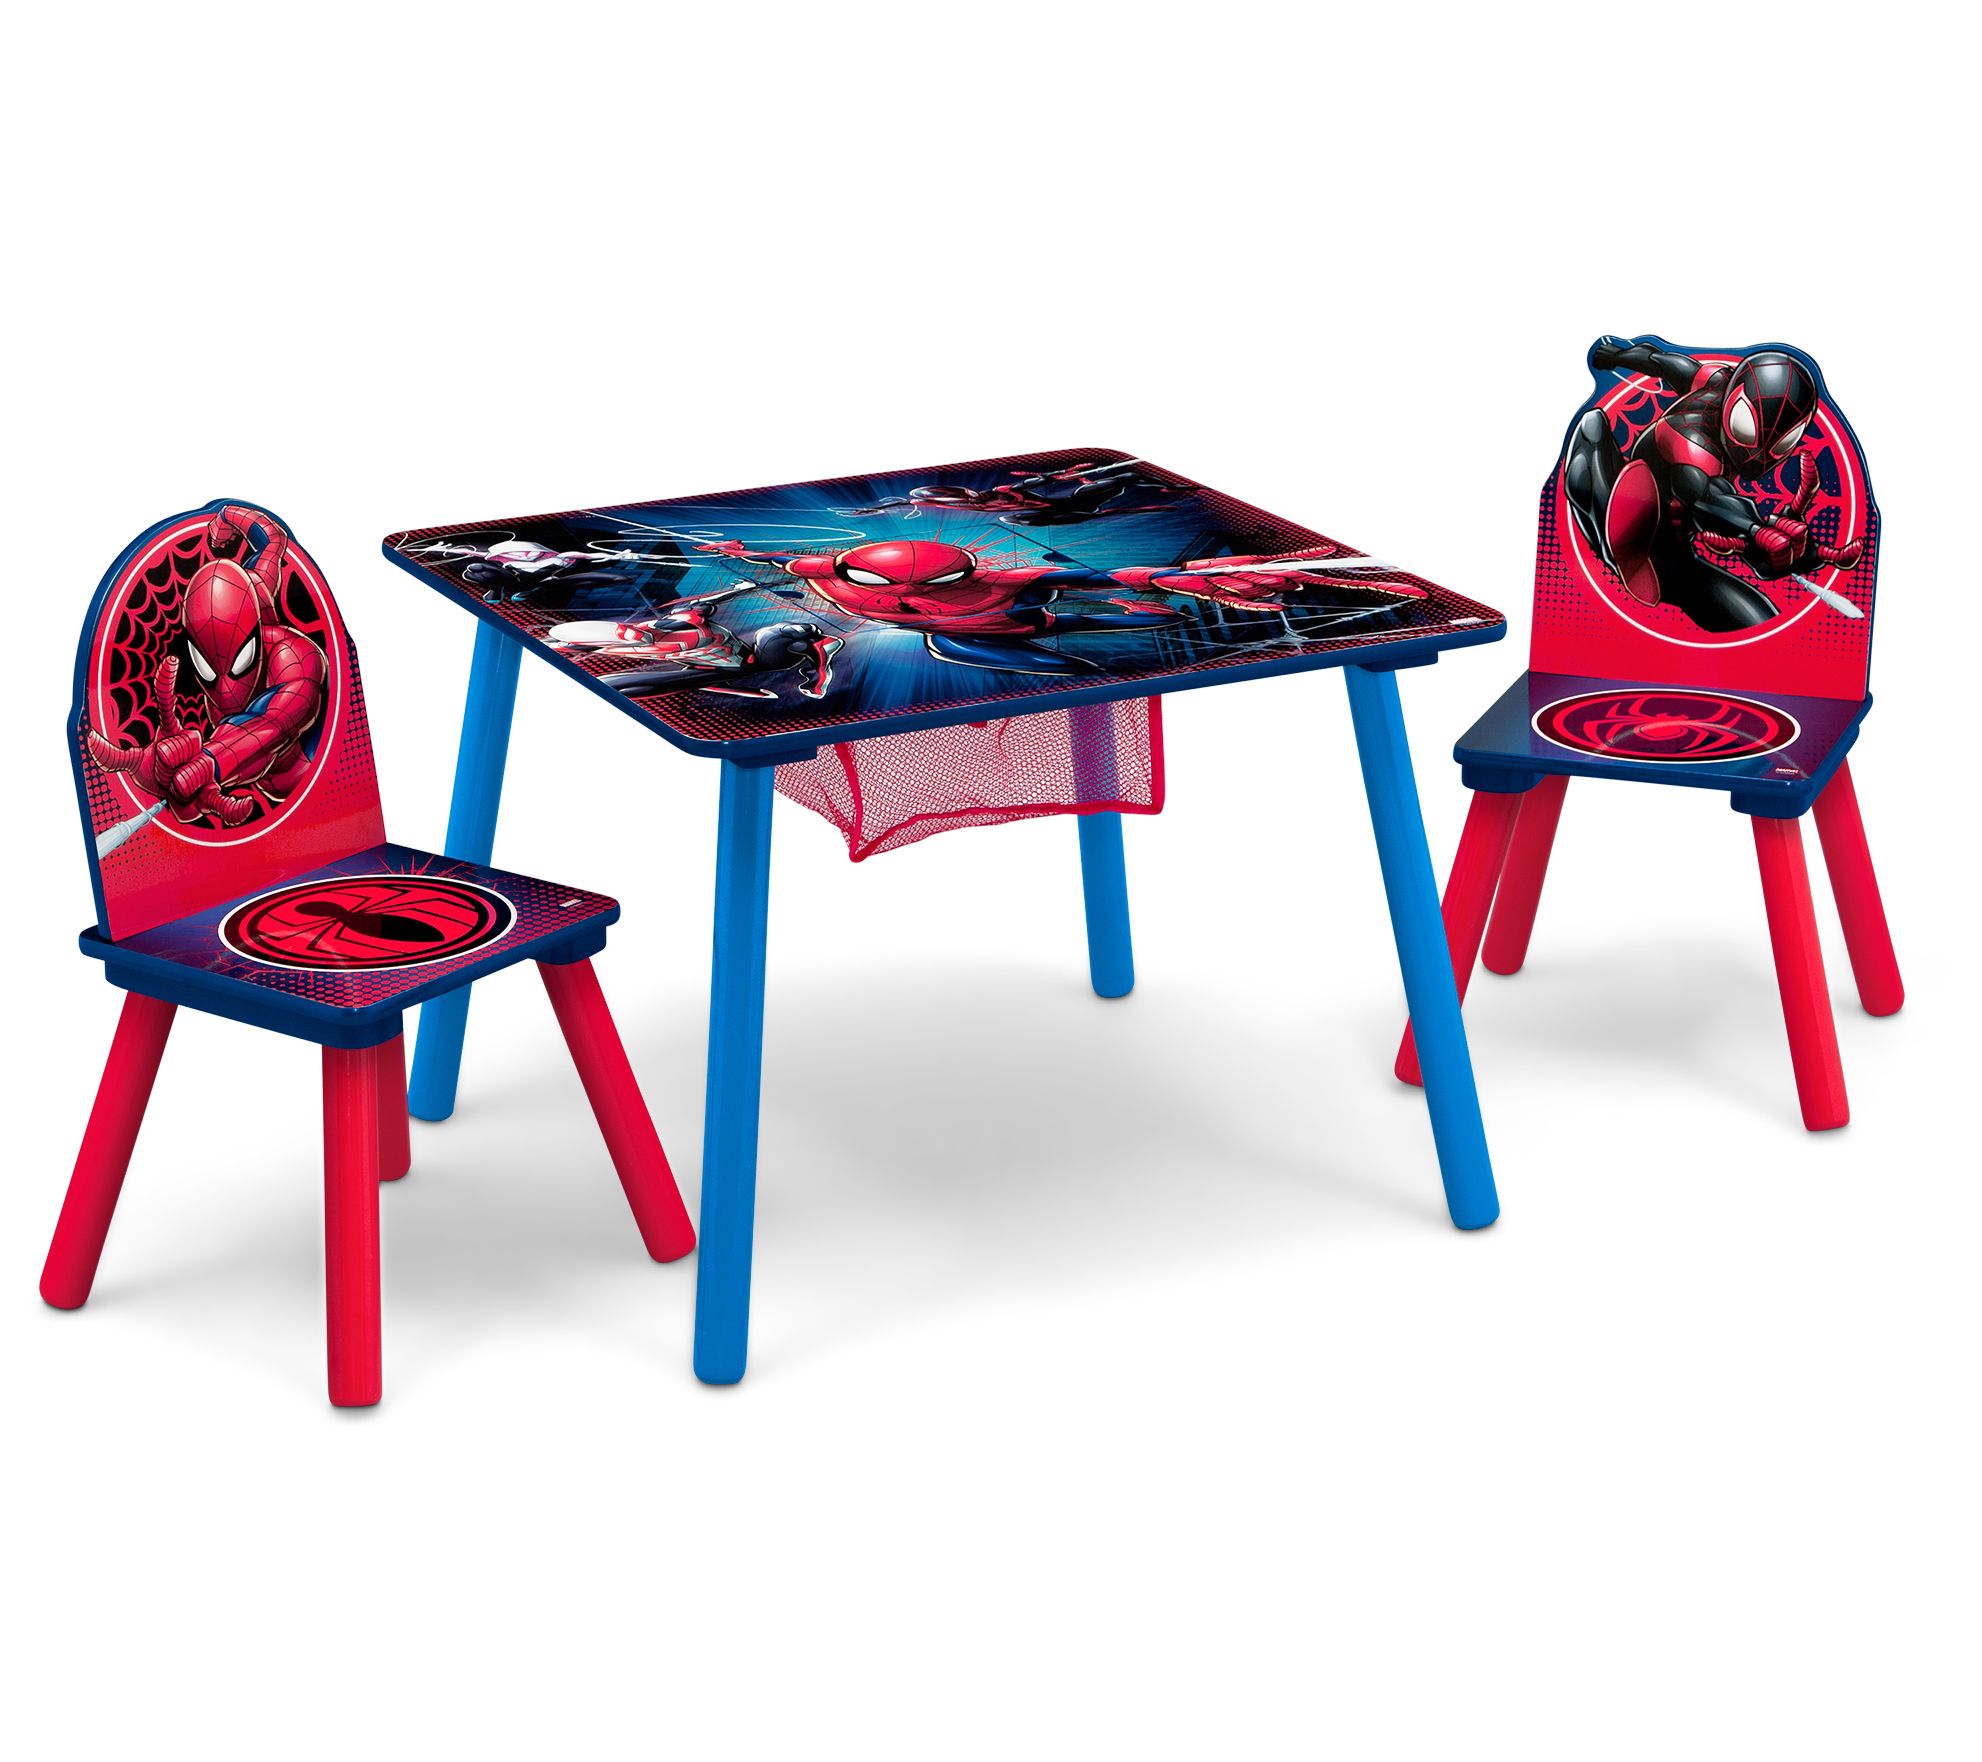  Delta Children MySize Kids Wood Table and Chair Set (2